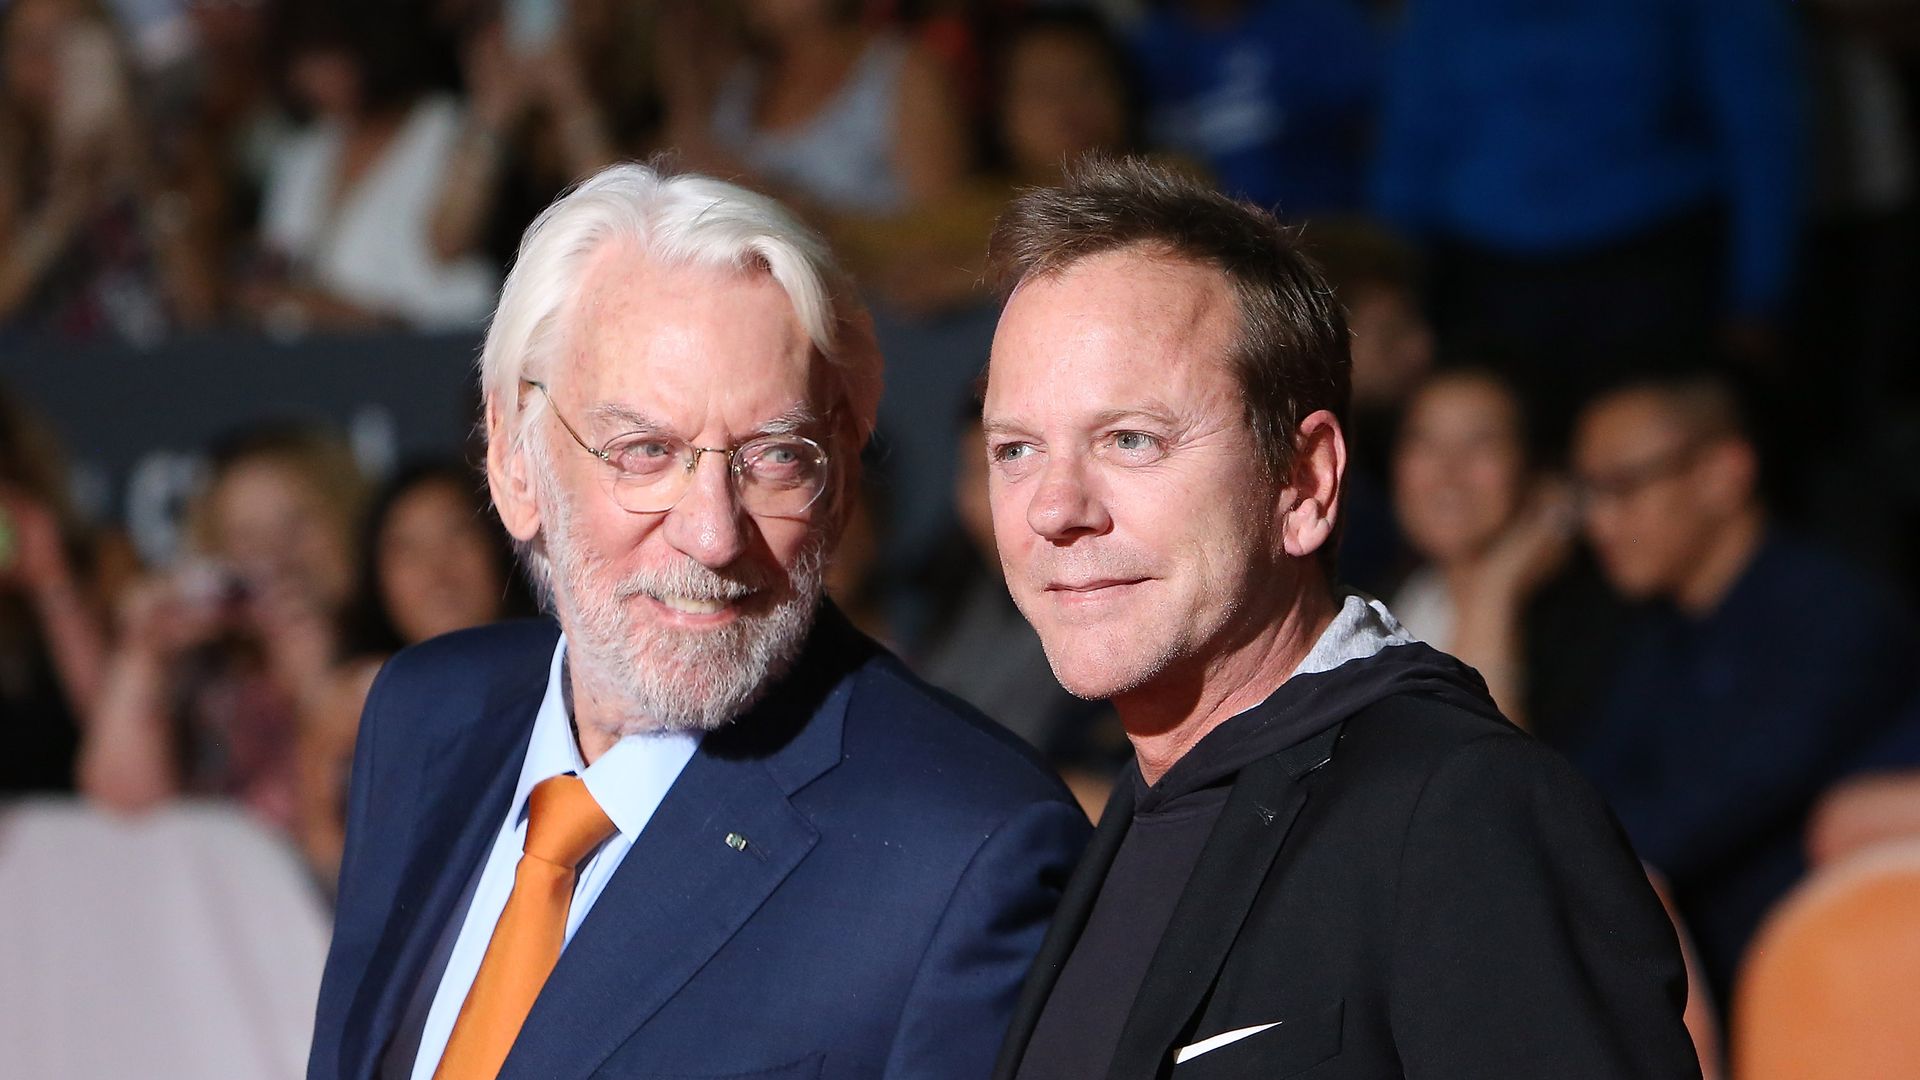 Kiefer Sutherland opens up about his estranged relationship with late dad Donald Sutherland